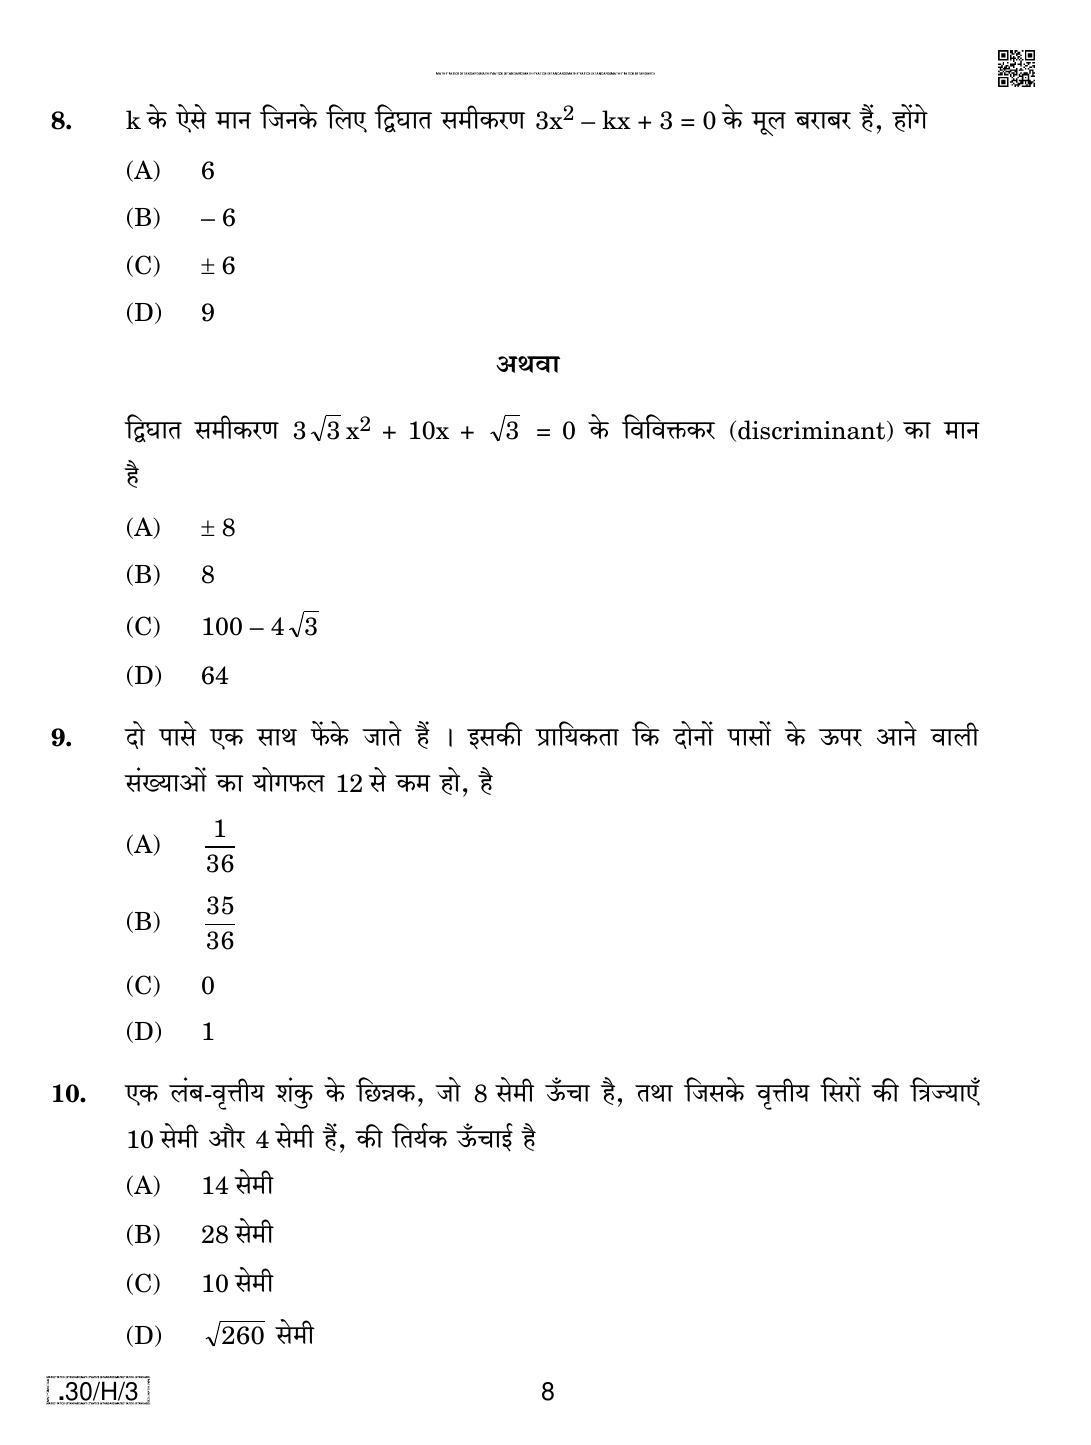 CBSE Class 10 30-C-3 - Maths (Standard) 2020 Compartment Question Paper - Page 8